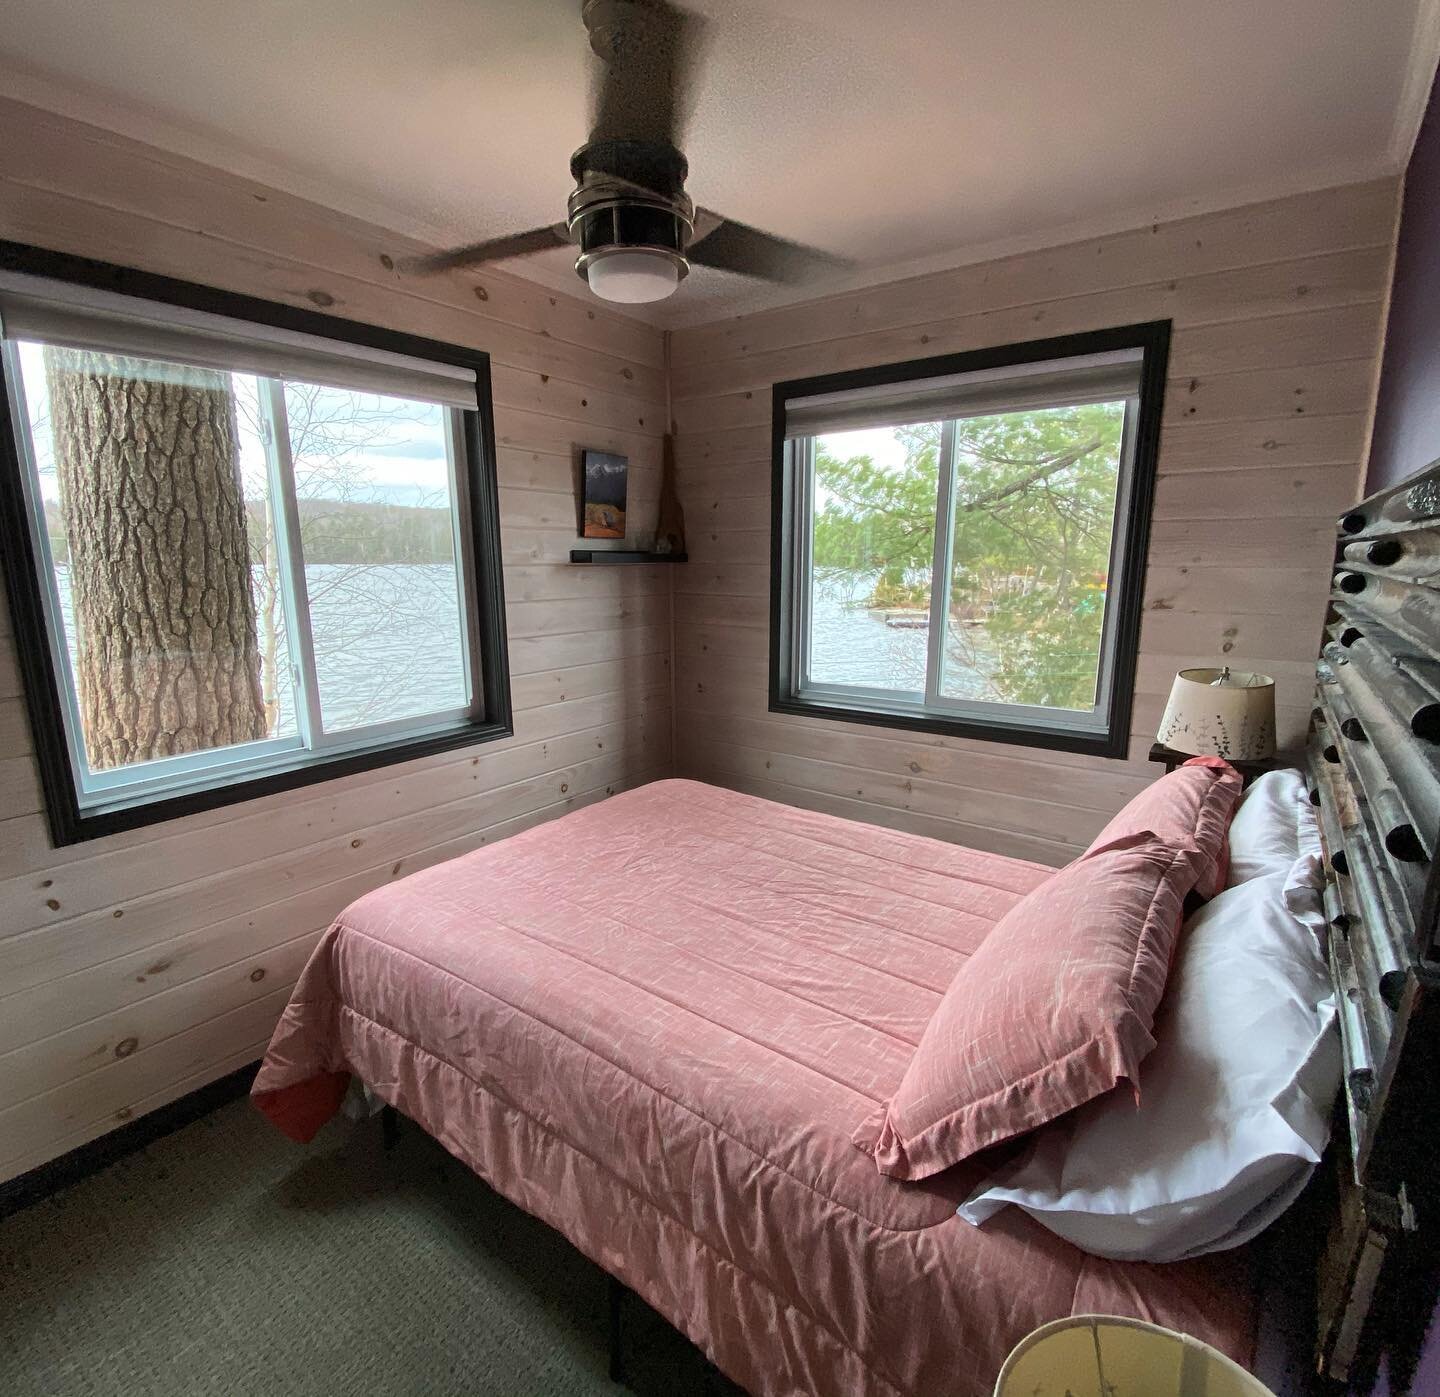 Can&rsquo;t go wrong waking up to this view! .
.
.
.
.
#airbnb #northfrontenac #canada #ontario #cloyne #infrontenac #imagesofcanada #lancastersresort #yourstodiscover #cabingoals #cabin #cabinlife #cabinlifestyle #canadian #canadiancabin #mississaga